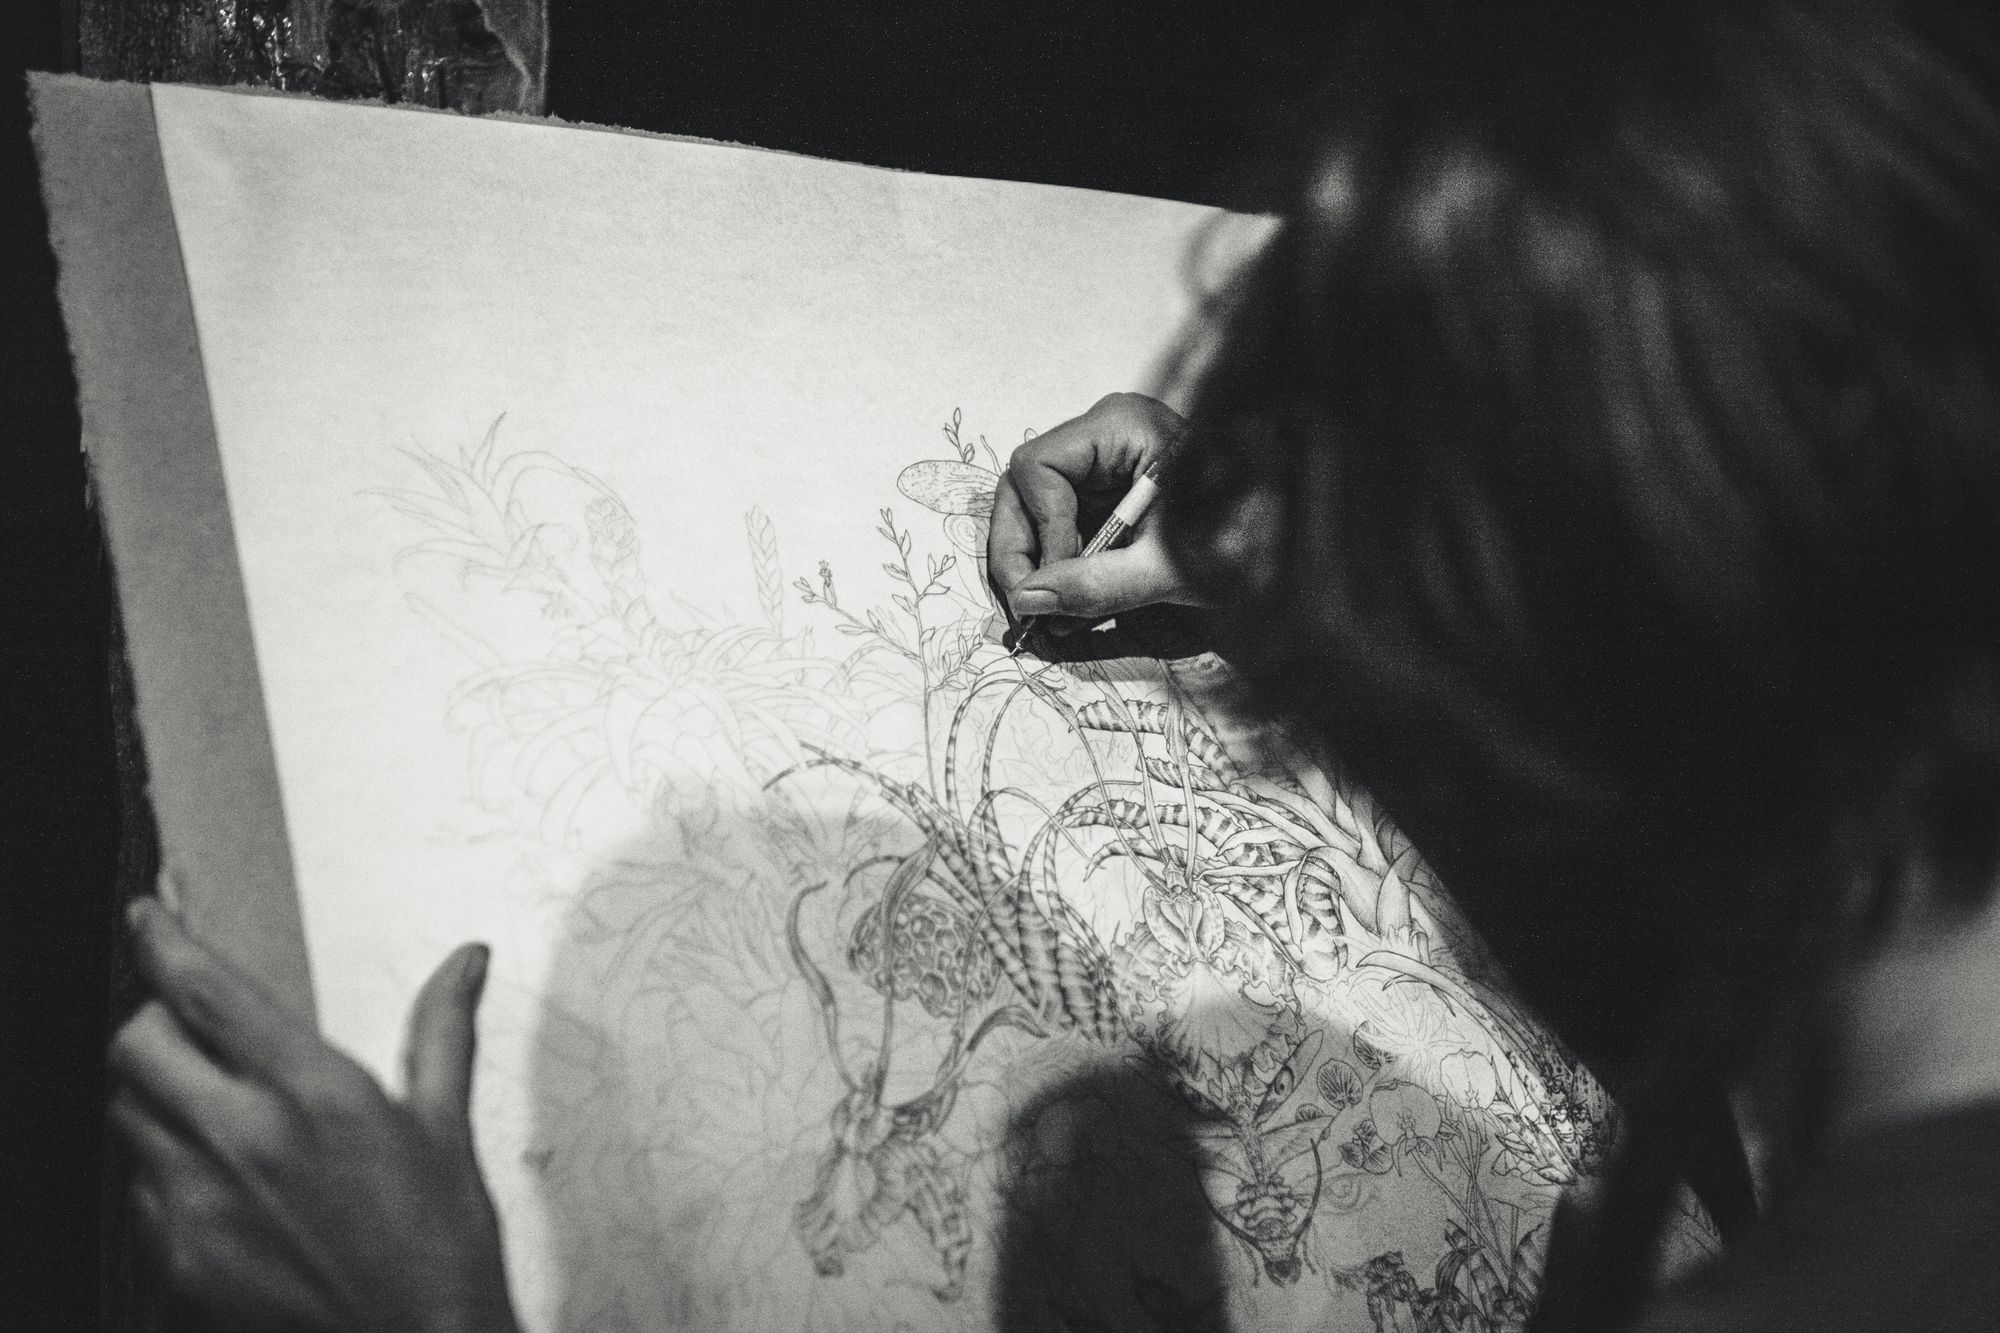 Woman drawing flowers - a grayscale photo.